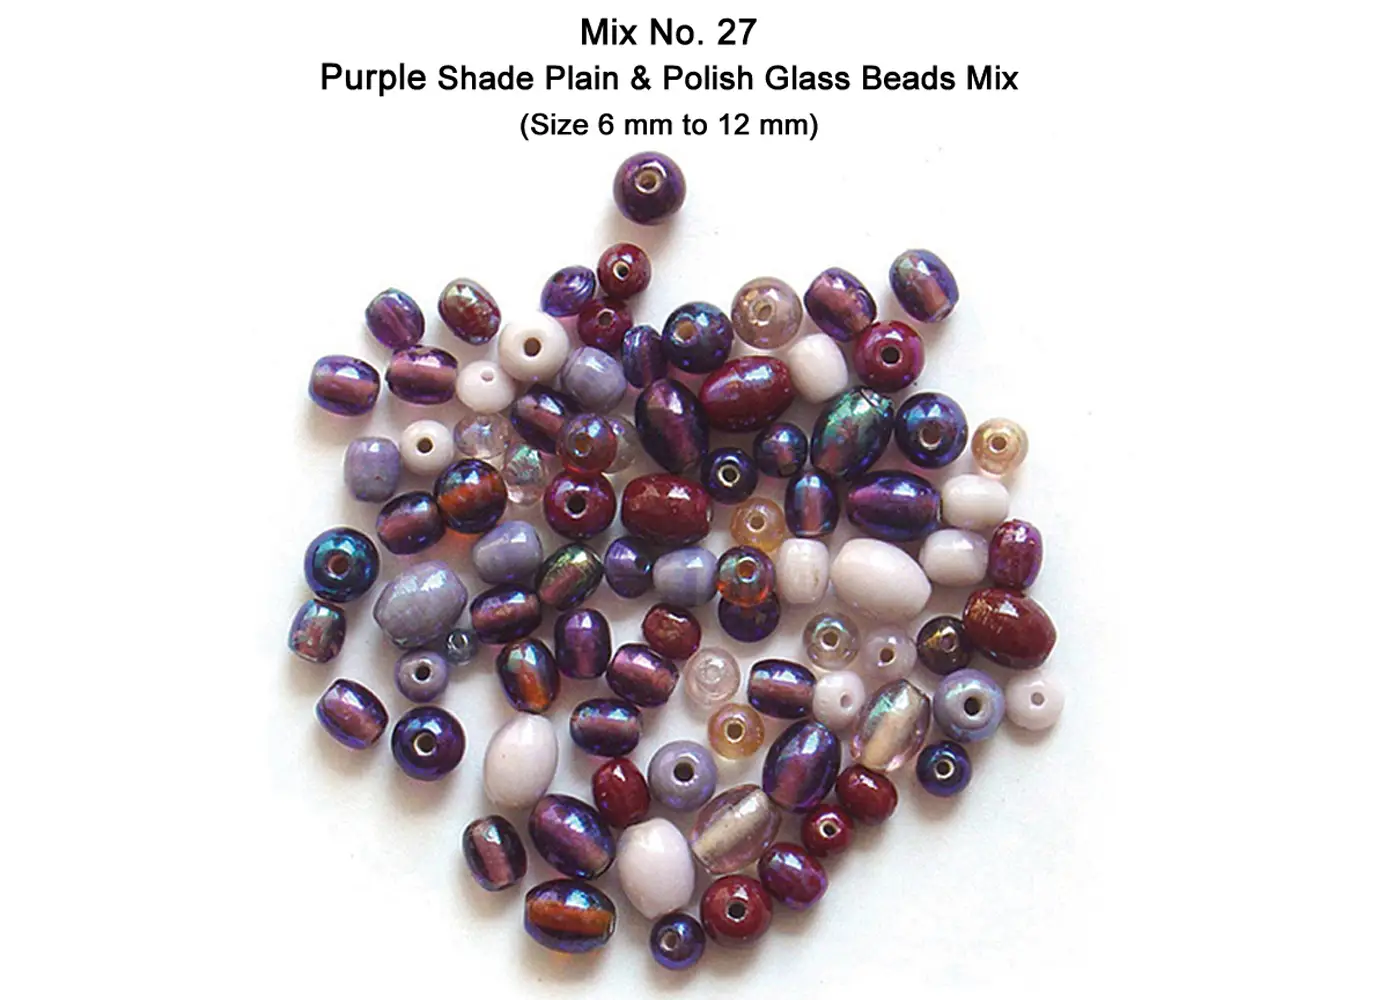 Purple Color Plain with Polish Glass Beads Mix (Size 6 mm to 12 mm)